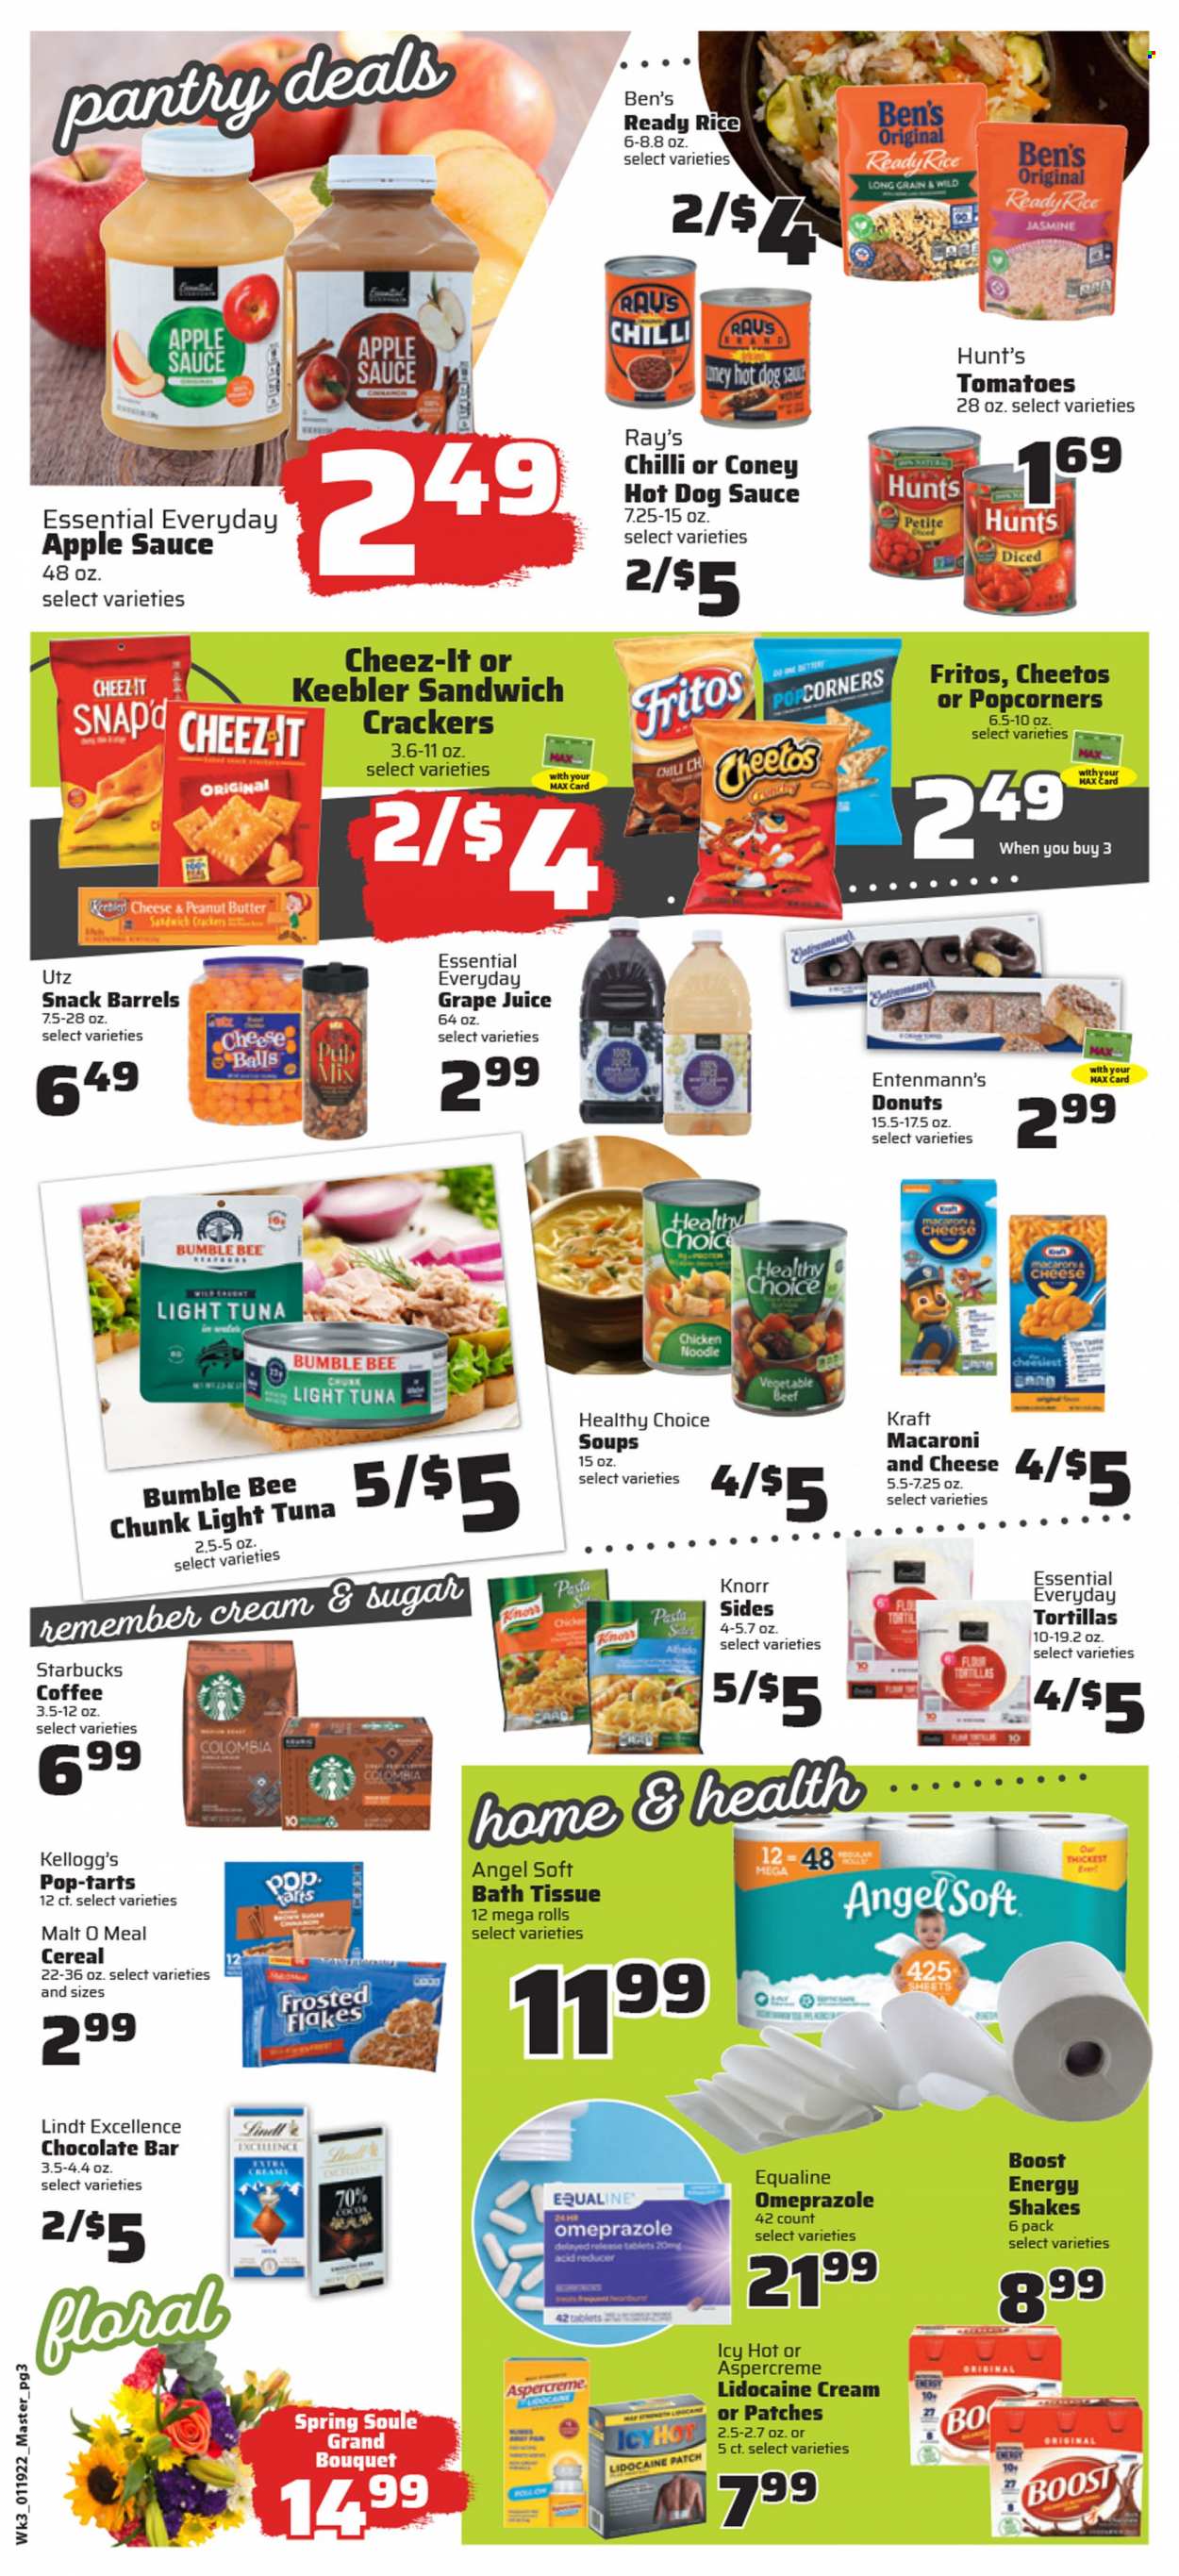 thumbnail - County Market Flyer - 01/19/2022 - 01/25/2022 - Sales products - tortillas, donut, Entenmann's, tomatoes, tuna, macaroni & cheese, hot dog, pasta, Bumble Bee, Knorr, sauce, noodles, Healthy Choice, Kraft®, shake, snack, Lindt, crackers, Kellogg's, Pop-Tarts, Keebler, chocolate bar, Fritos, Cheetos, popcorn, Cheez-It, sugar, malt, light tuna, cereals, rice, apple sauce, peanut butter, juice, Boost, coffee, Starbucks. Page 3.